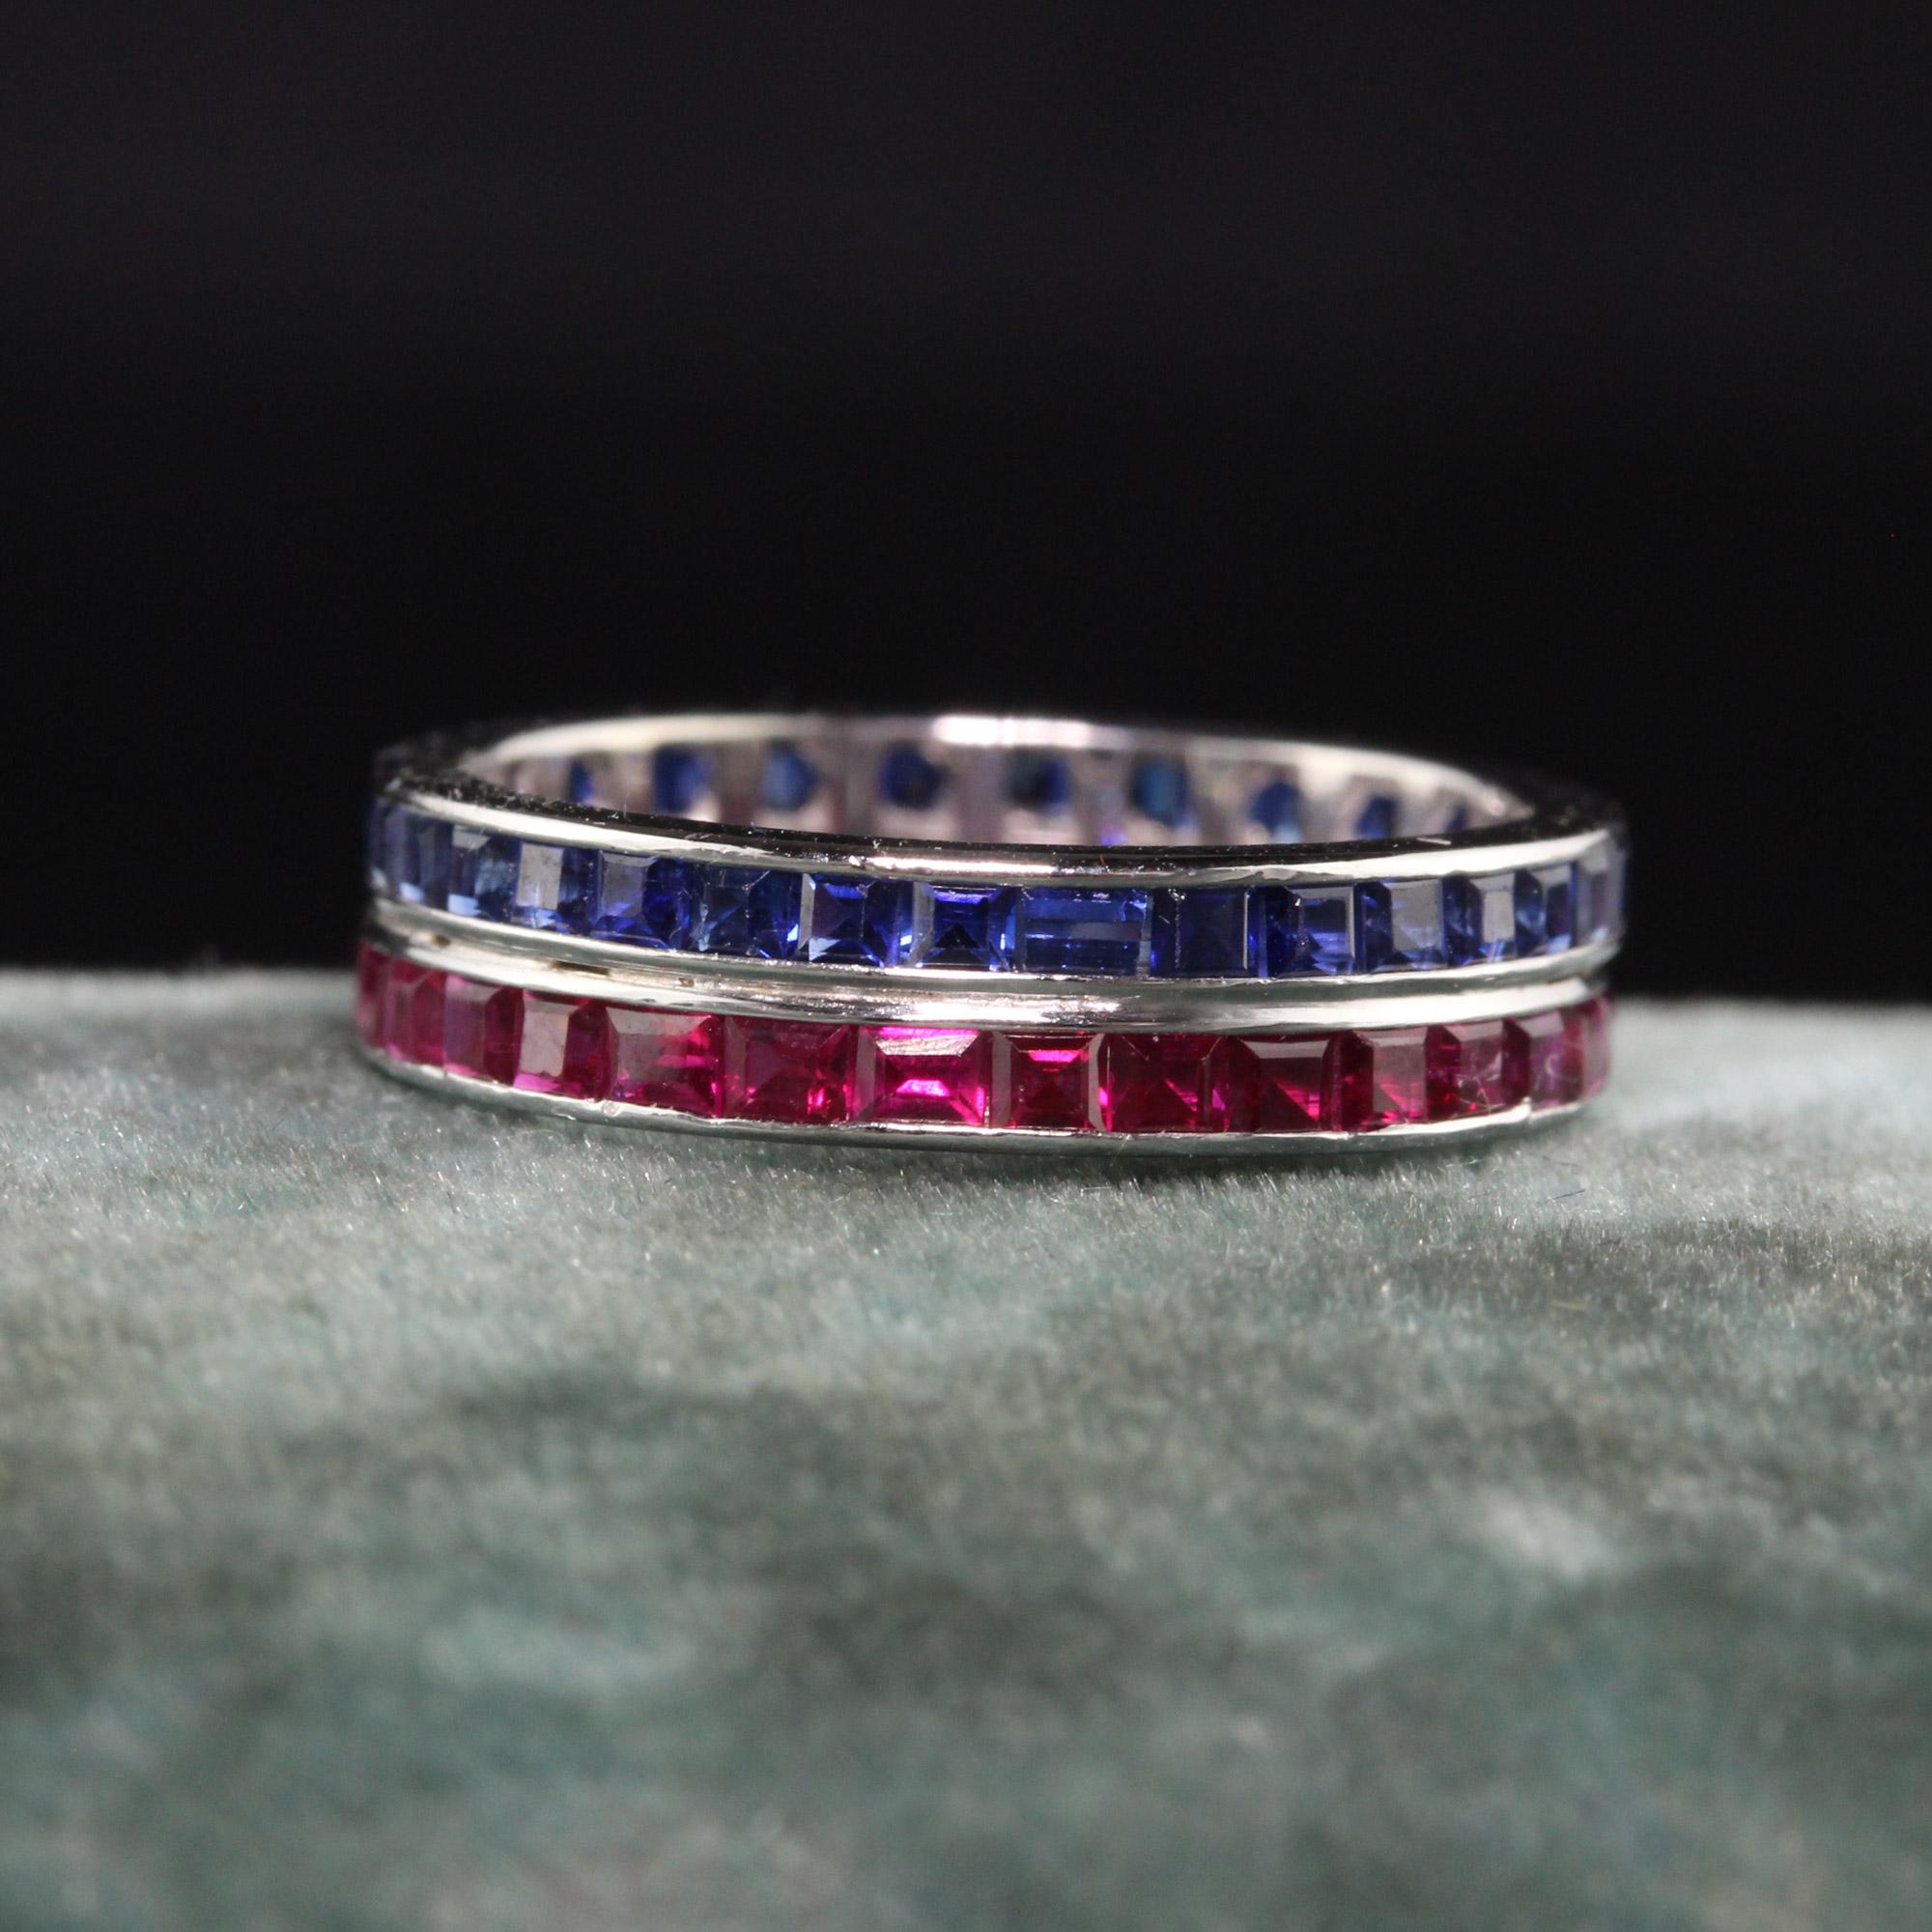 Beautiful Antique Art Deco 14K White Gold Ruby and Sapphire Eternity Band. This beautiful eternity band is crafted in 14k white gold. The band has blue sapphire and rubies going around the entire ring.

Item #R1294

Metal: 14K White Gold

Weight: